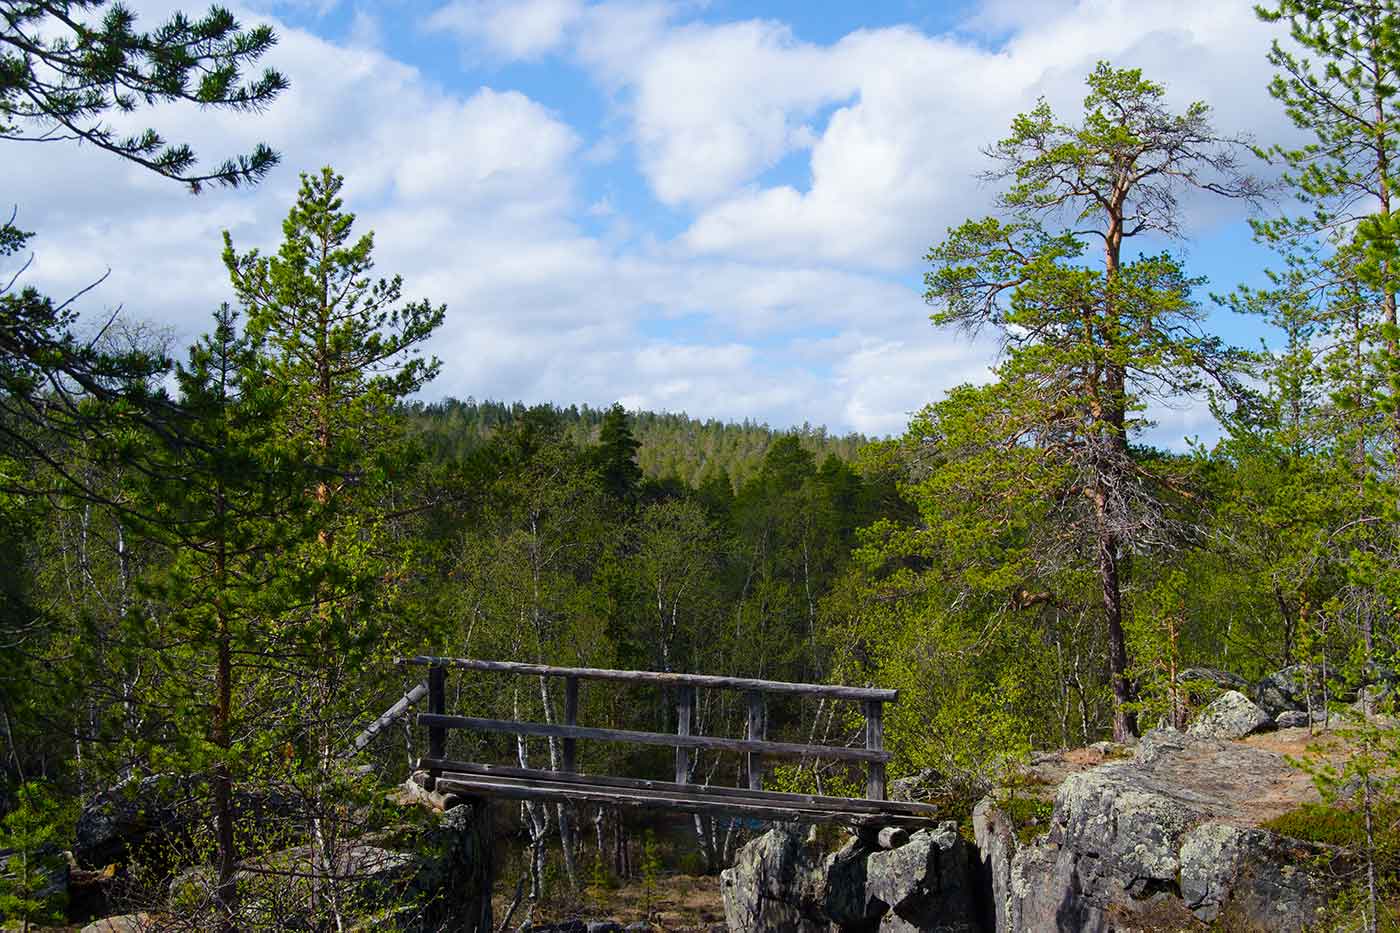 12 Incredible Attractions to See and Things to Do in Saariselkä, Finland